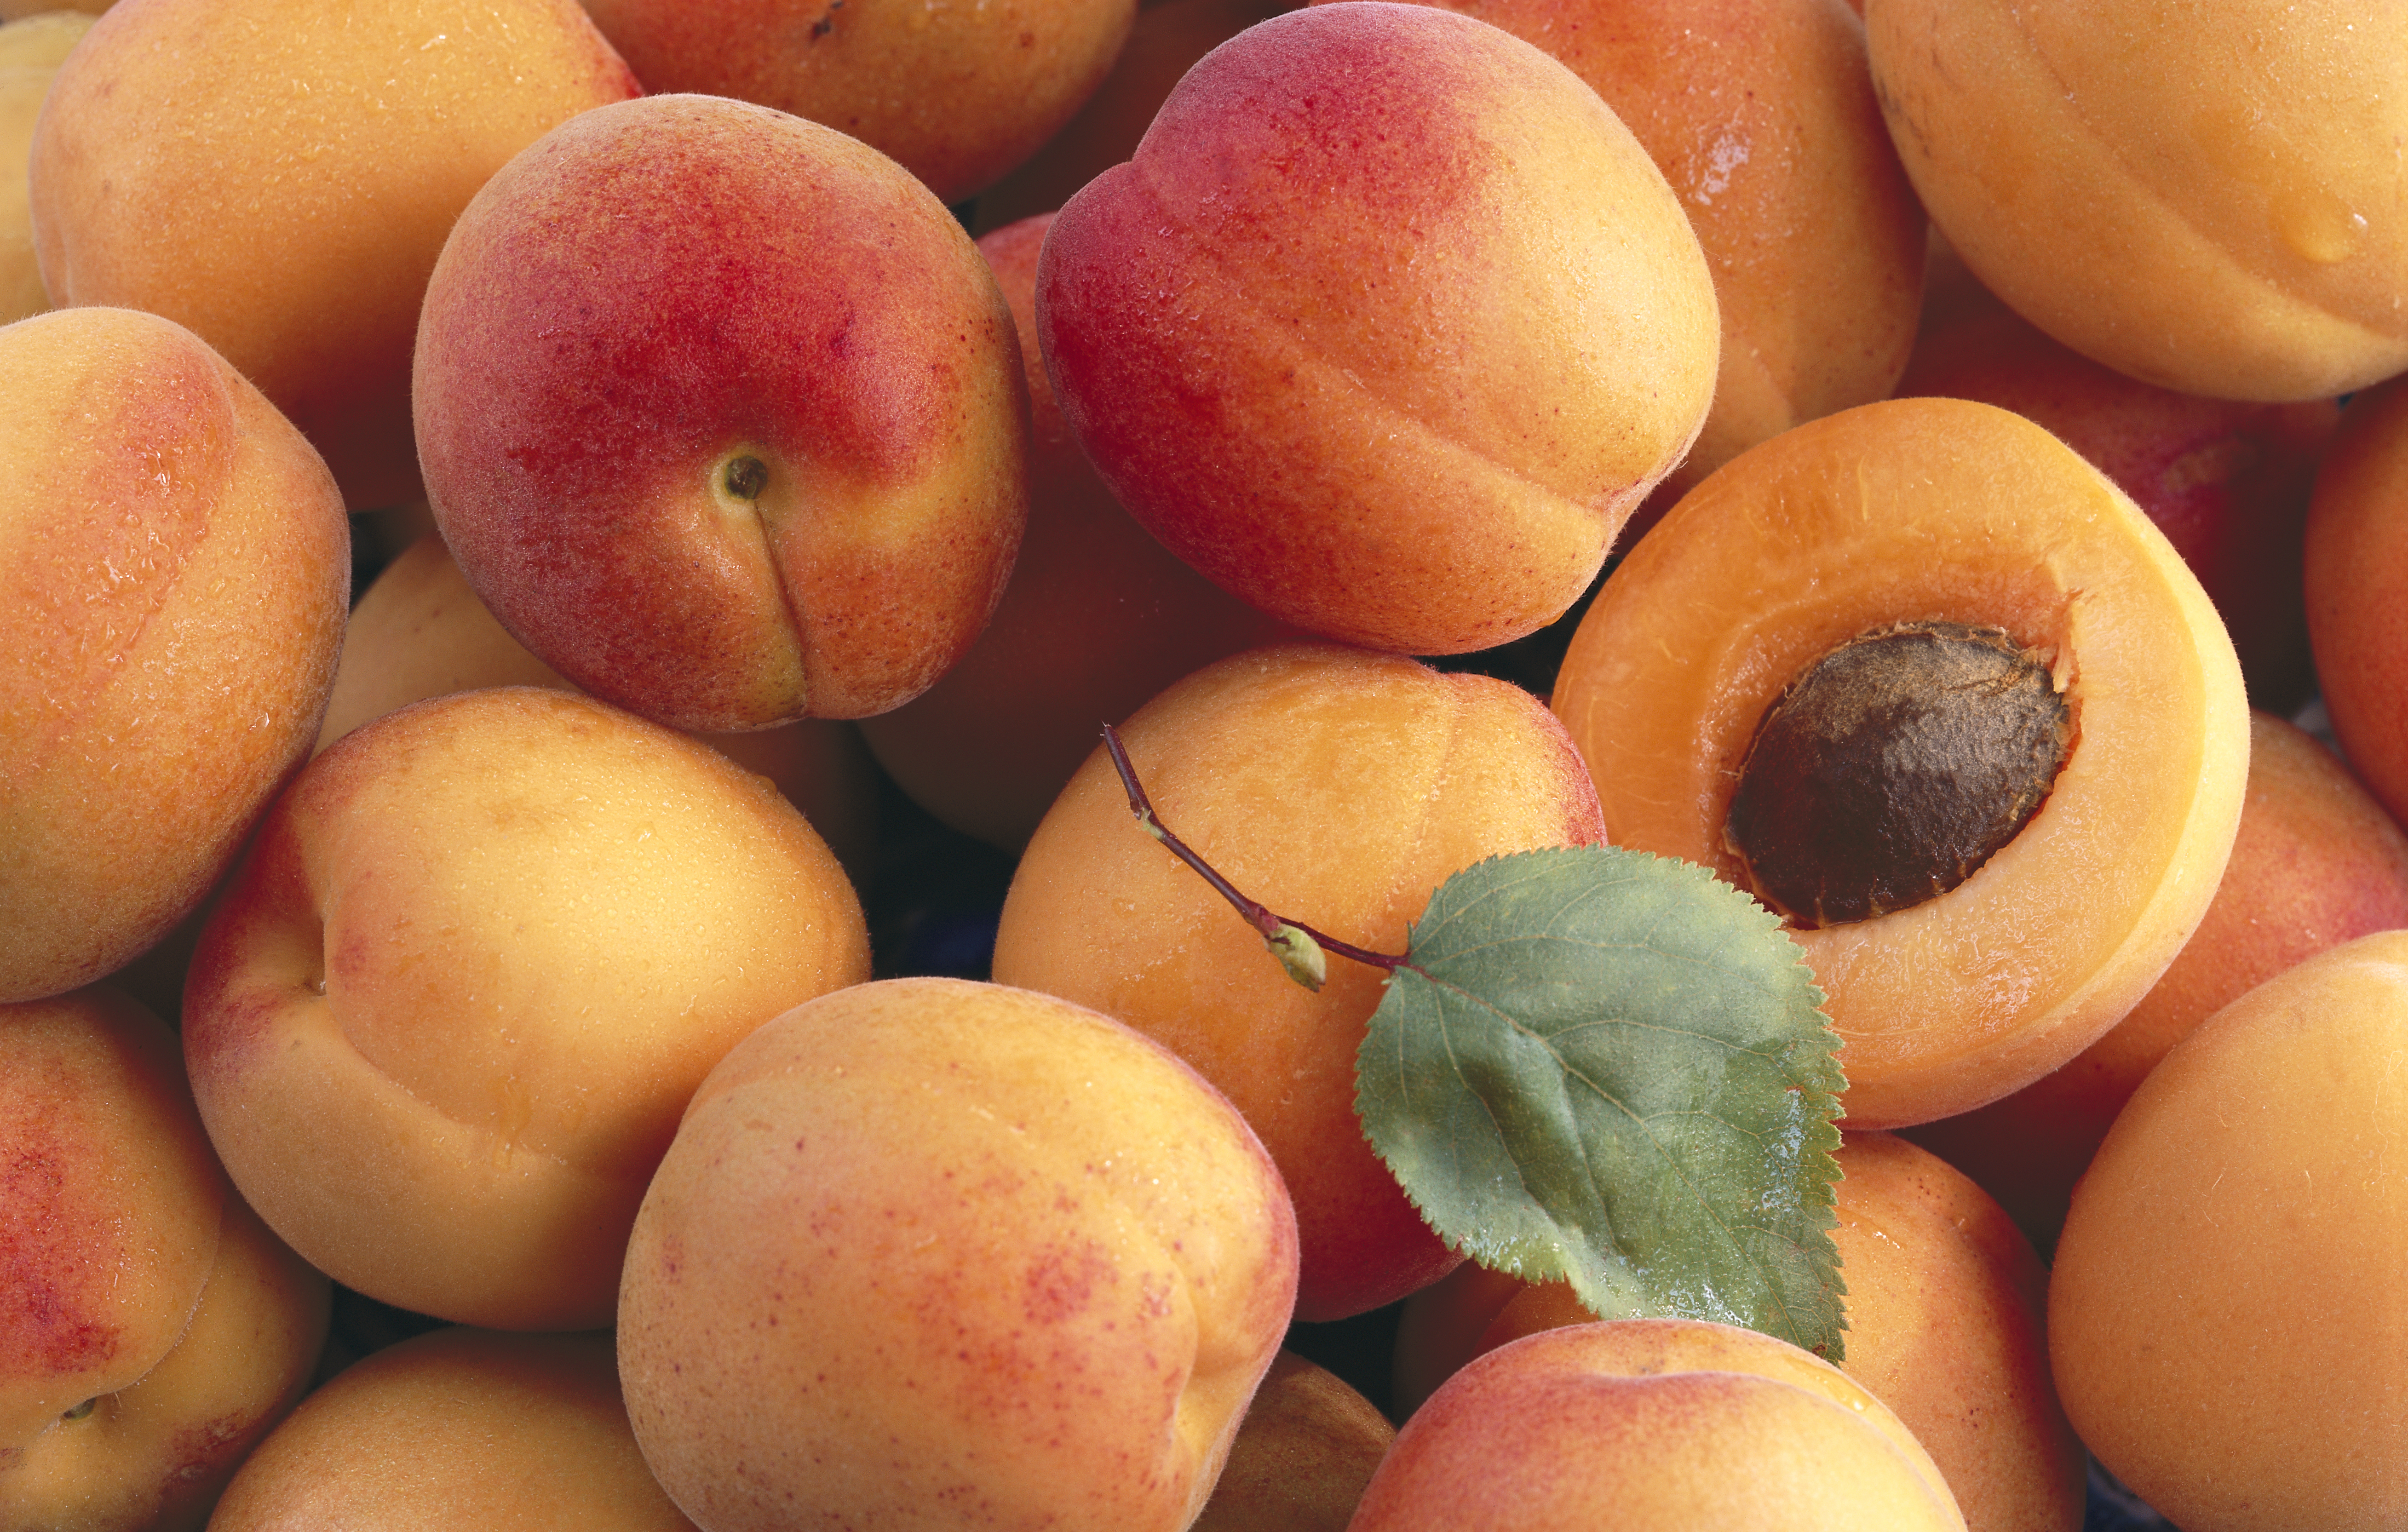 Apricots tend to have a pretty short season, but James Parker, the associate coordinator for Whole Foods Market’s global perishables buying office, says weather indicates that we are going to have tasty apricots in May.